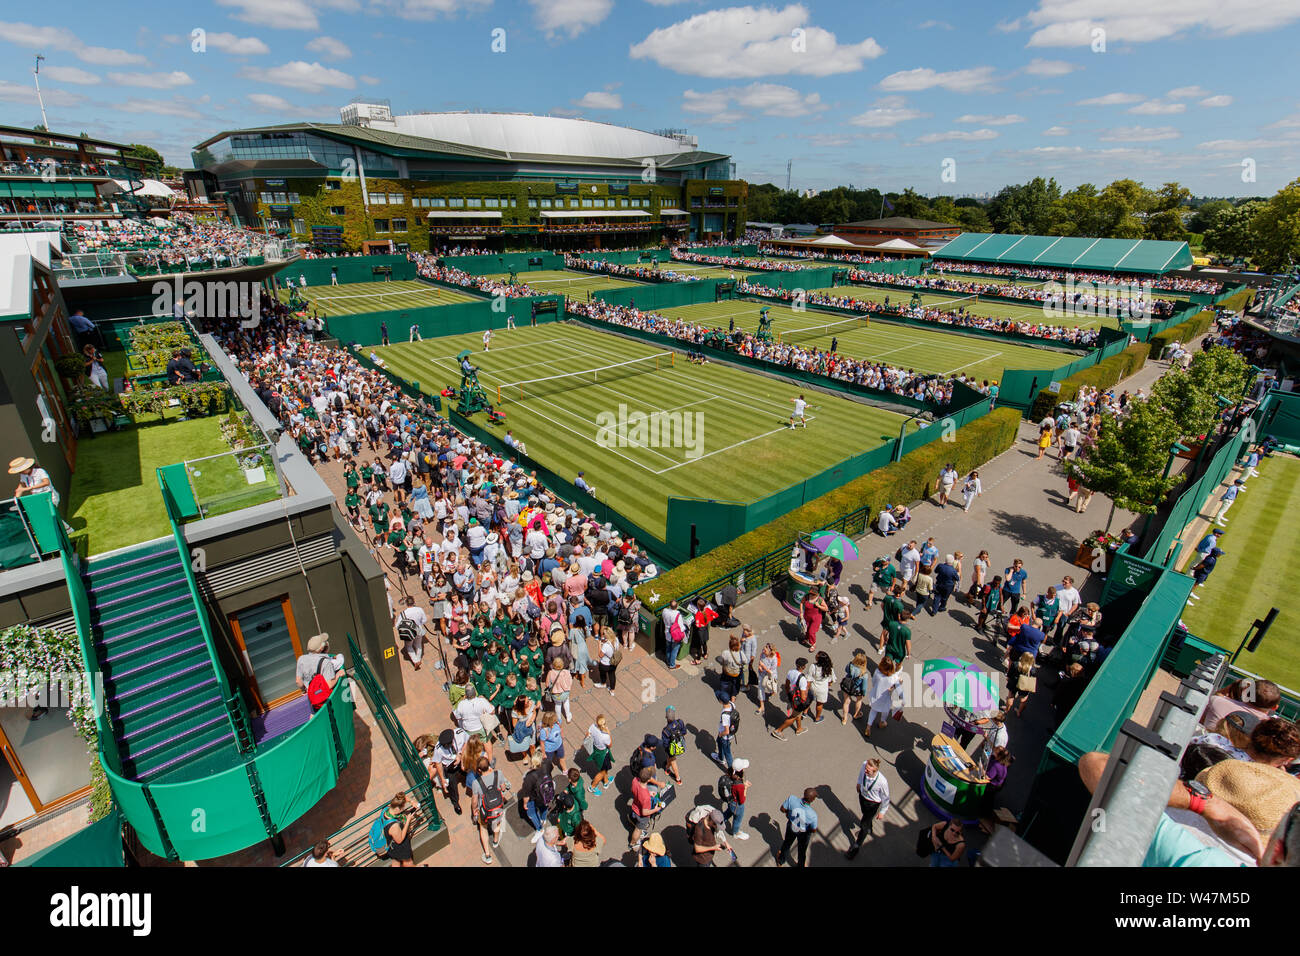 General View of Centre Court and The Wimbledon Championships 2019. Held at The All England Lawn Tennis Club, Wimbledon. Stock Photo